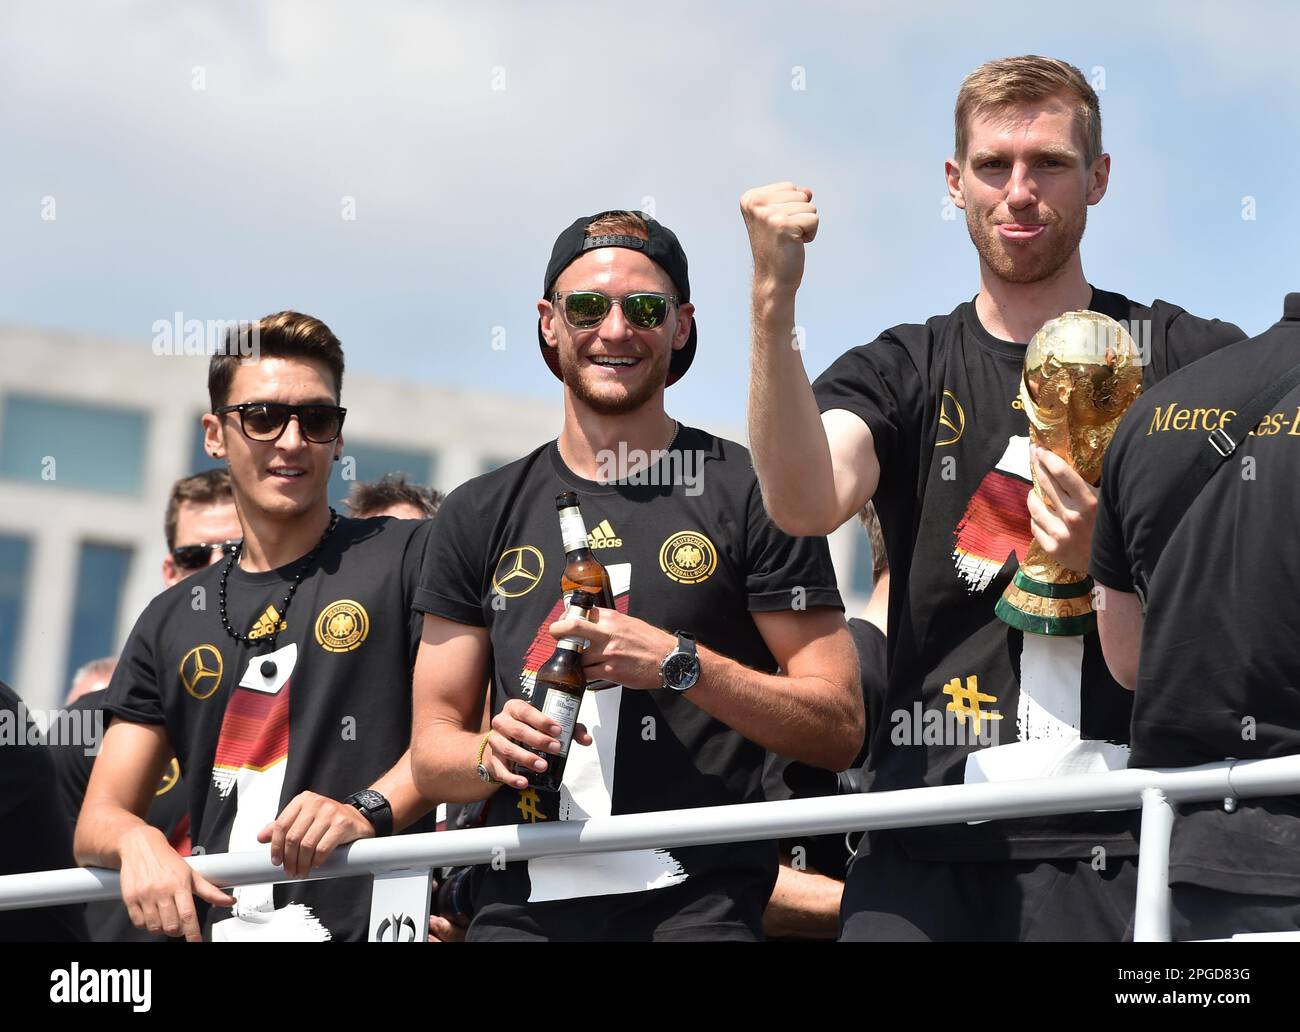 FILED - 15 July 2014, Berlin: National team players Mesut Özil, Benedikt Höwedes and Per Mertesacker (l-r) stand jubilantly with the World Cup trophy in the open team bus at the national soccer team's reception in the capital. After 1954, 1974 and 1990, Germany has become world champion for the fourth time with a victory over Argentina. Former world champion Özil has ended his career as a professional footballer at the age of 34. The 92-time German international announced his immediate retirement Wednesday on his verified profiles on Twitter, Instagram and Facebook. Photo: Jens Kalaene/dpa-Zen Stock Photo